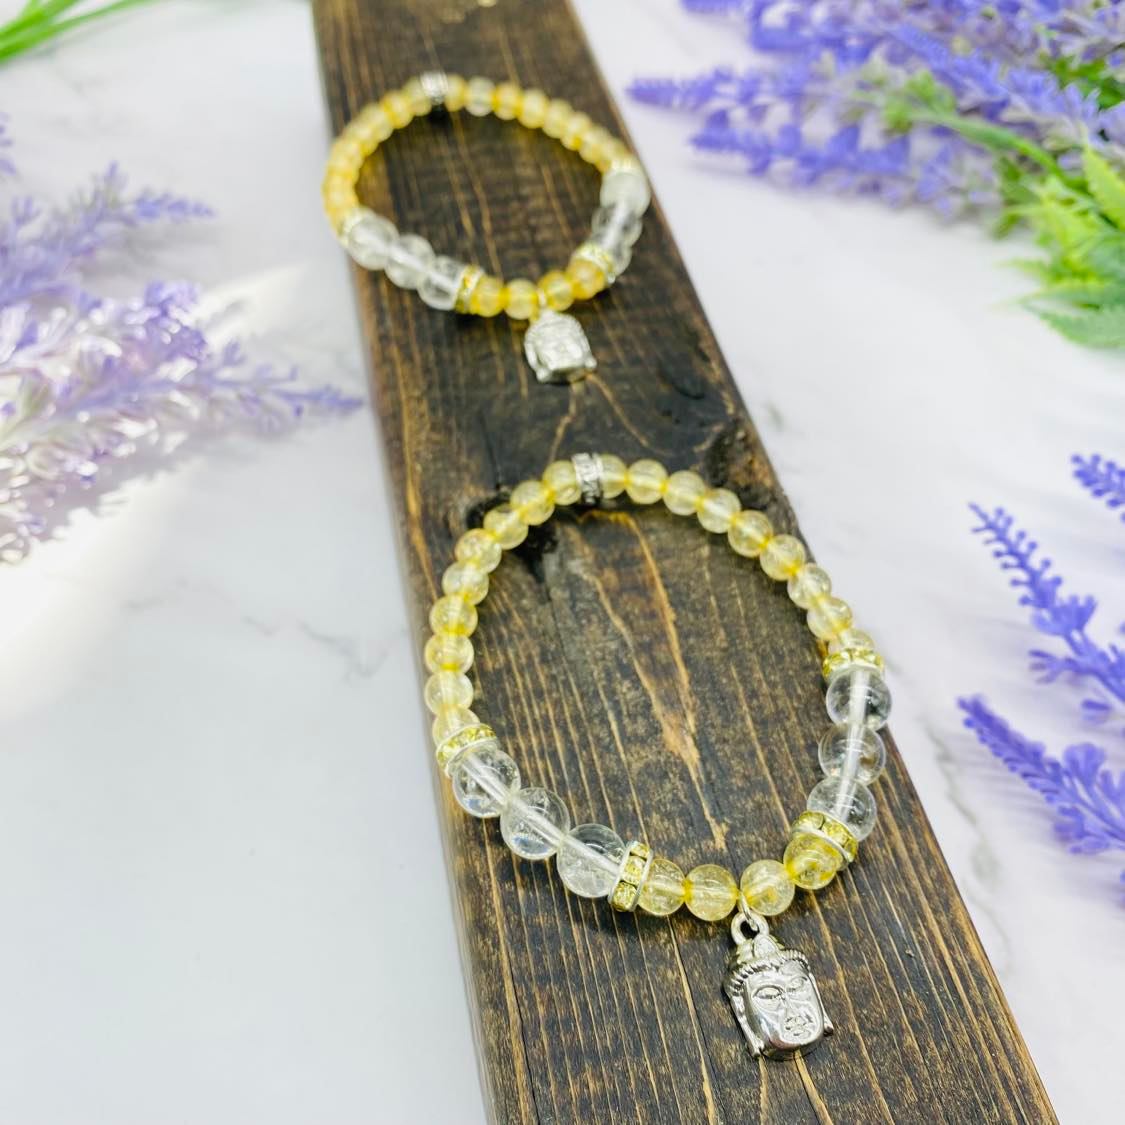 8 mm Citrine Bracelet with Charms, Quartz with Citrine, Tree of Life Bracelet, Citrine with Buddha Jewelry,  Stretch Bracelet, Gift for Her